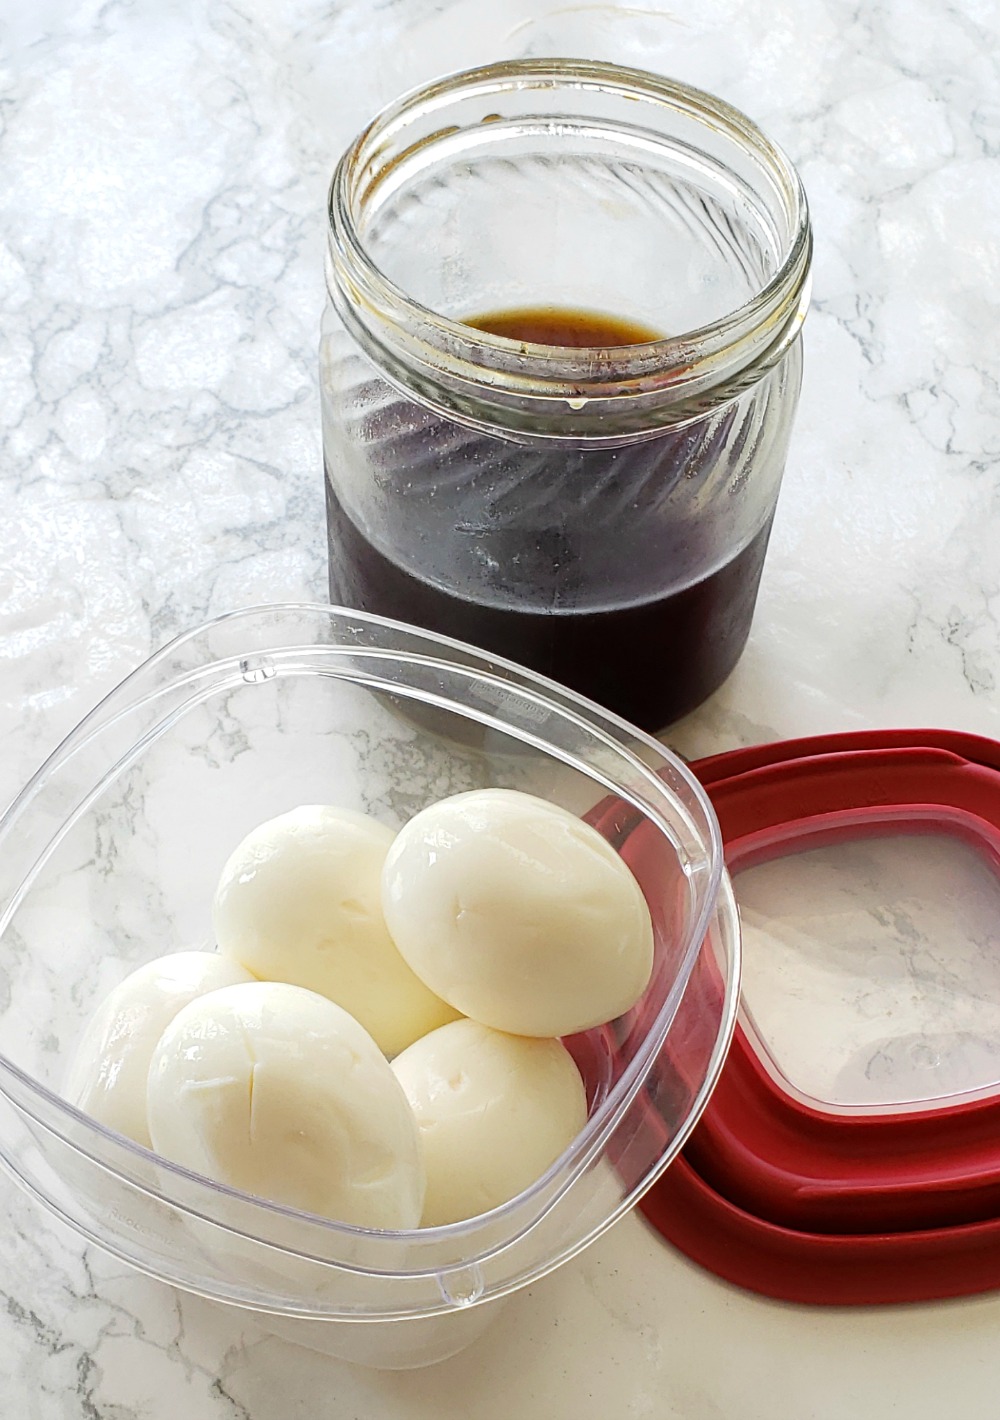 Clear container of 5 hard-boiled eggs sits on a white marble countertop with red rimmed lid alongside and dark liquid in a jar in the background